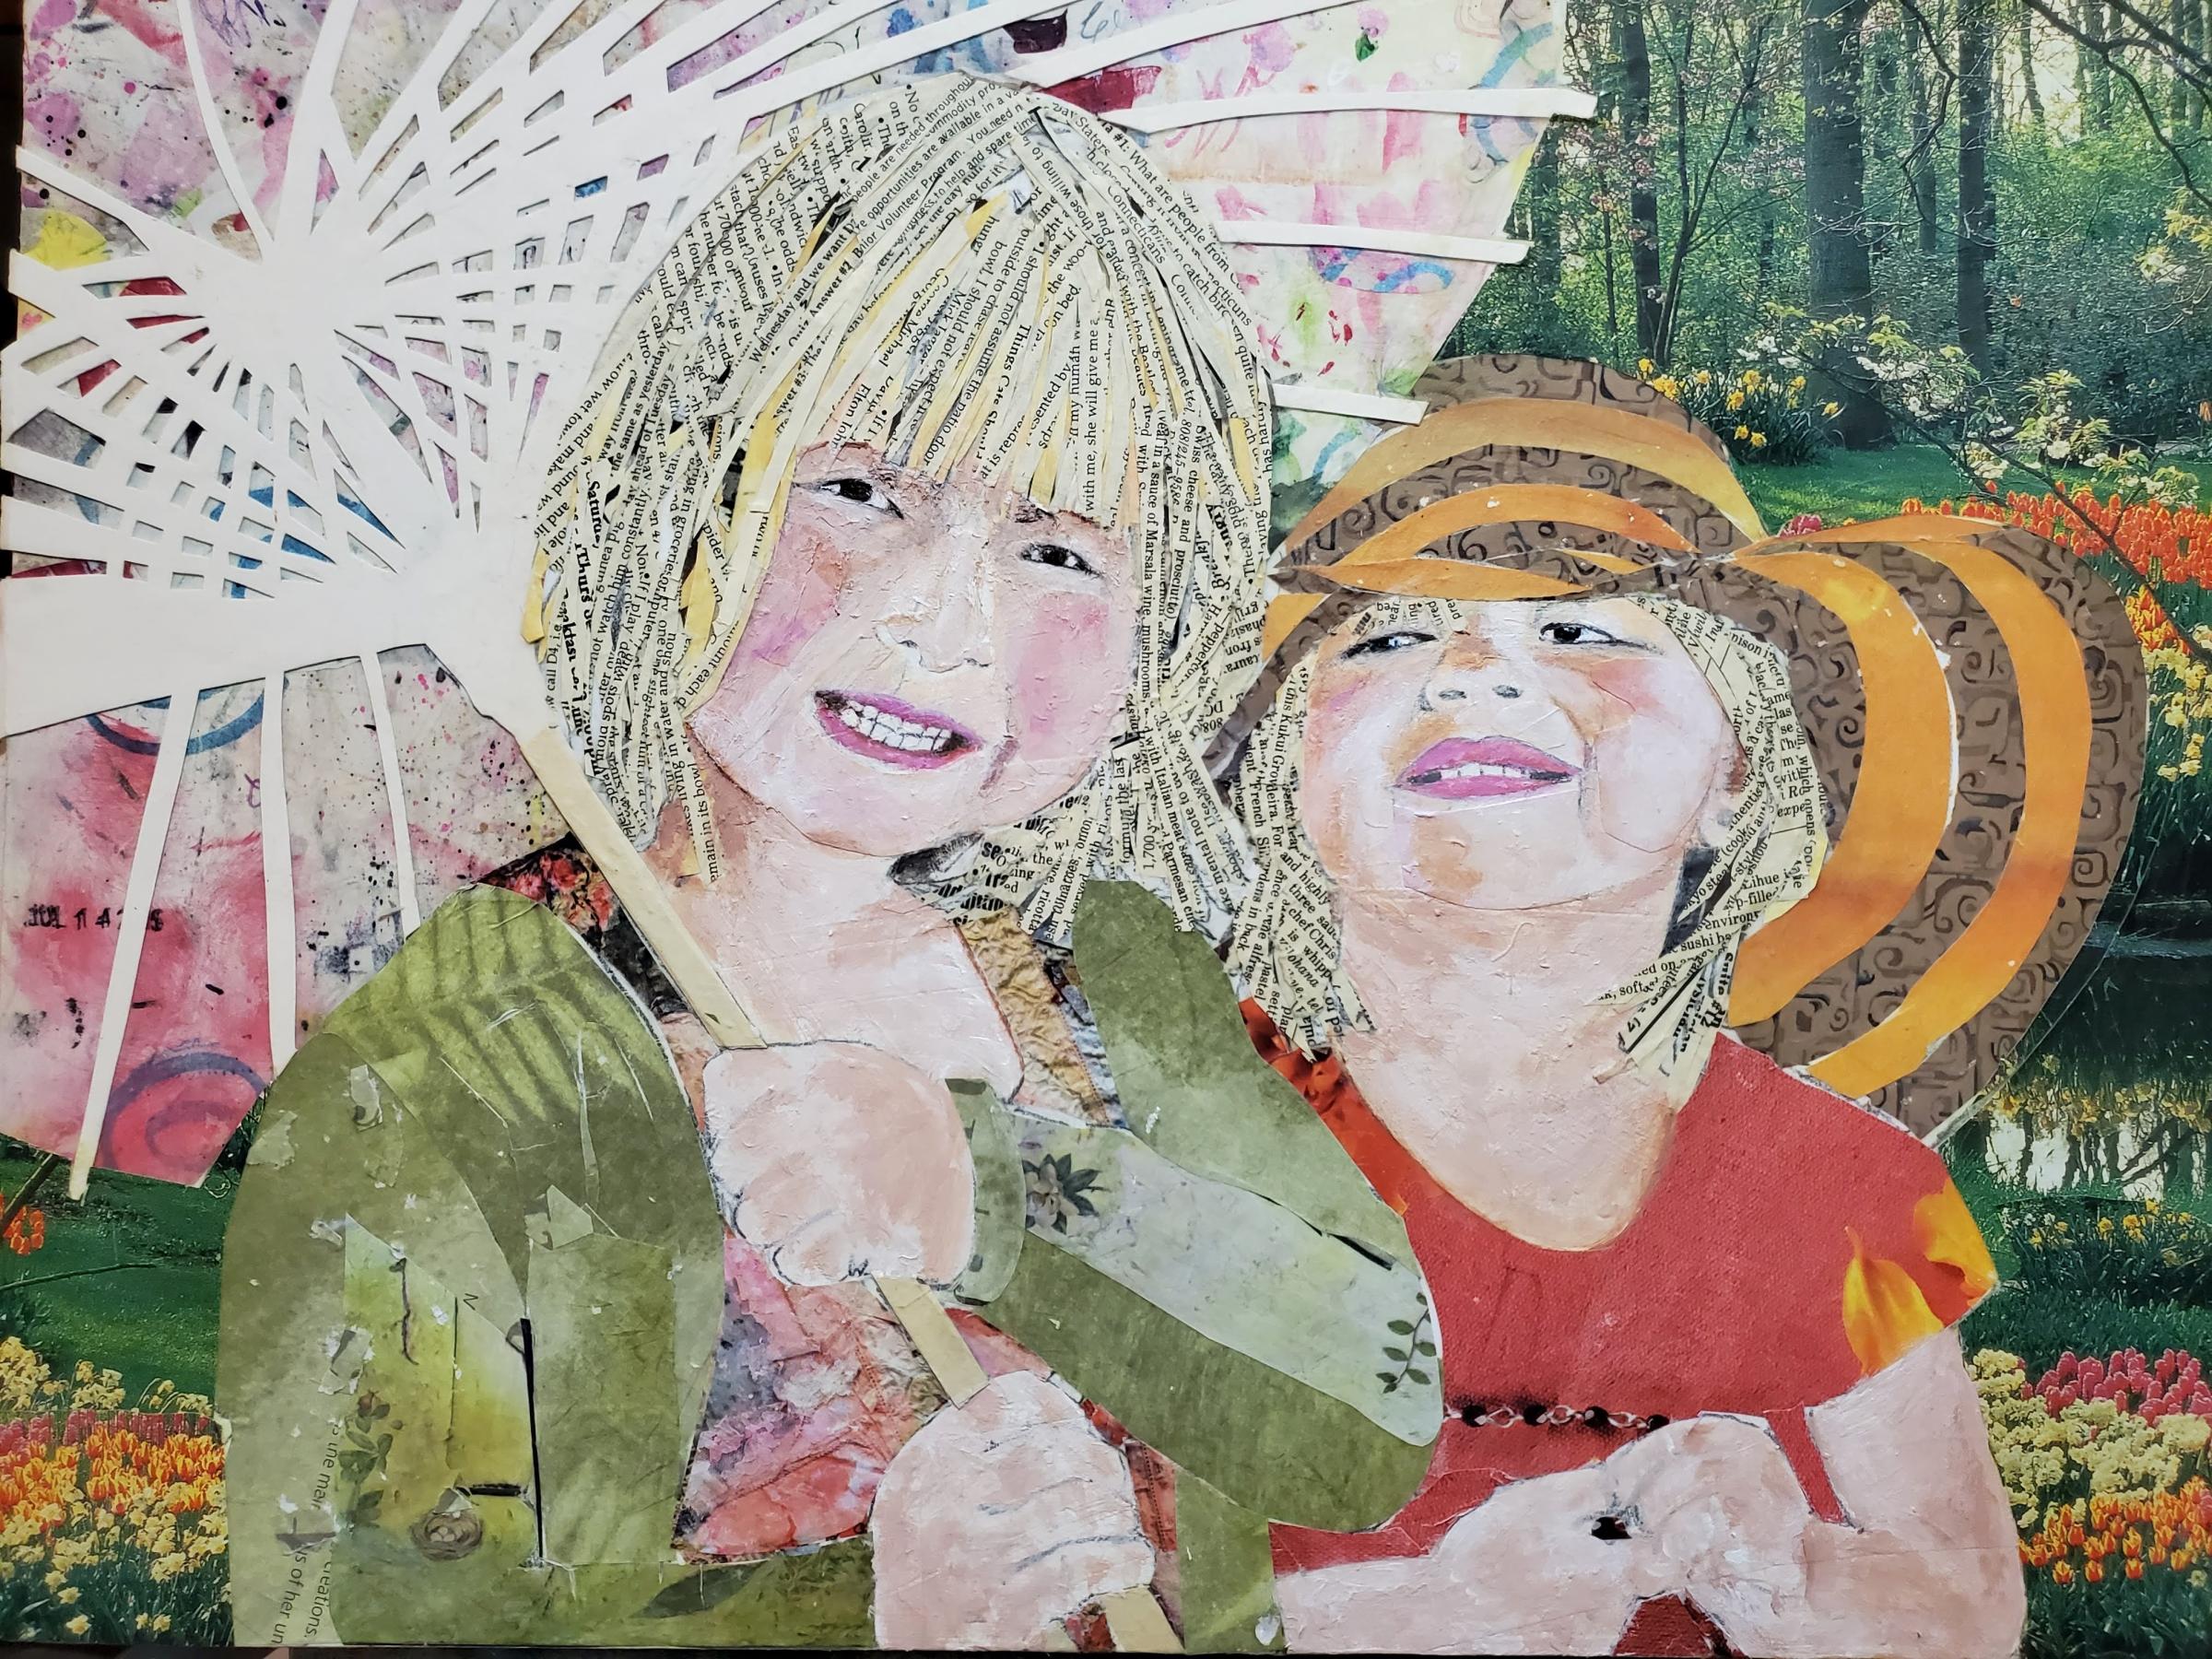 "Sisters" A torn and cut paper collage of two sisters, one with a parasol and the other with a floppy hat. Both are smiling.